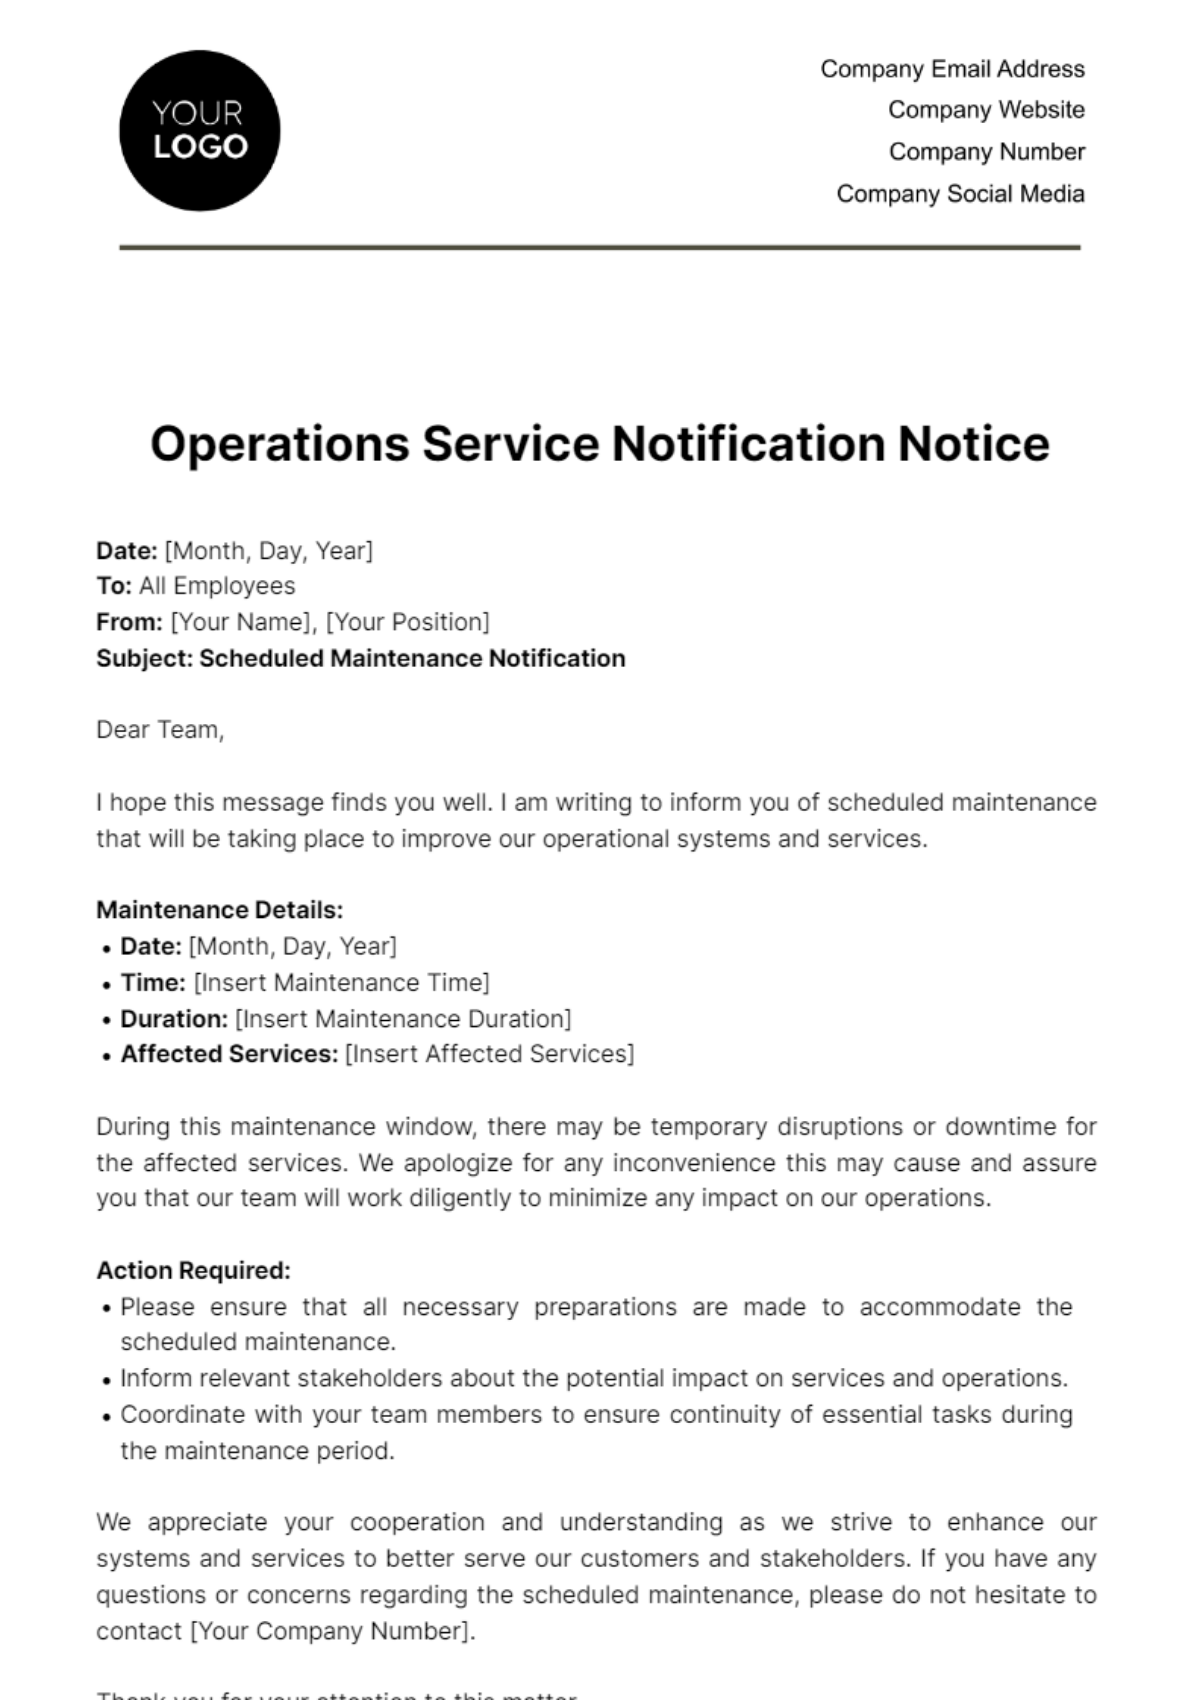 Free Operations Service Notification Notice Template